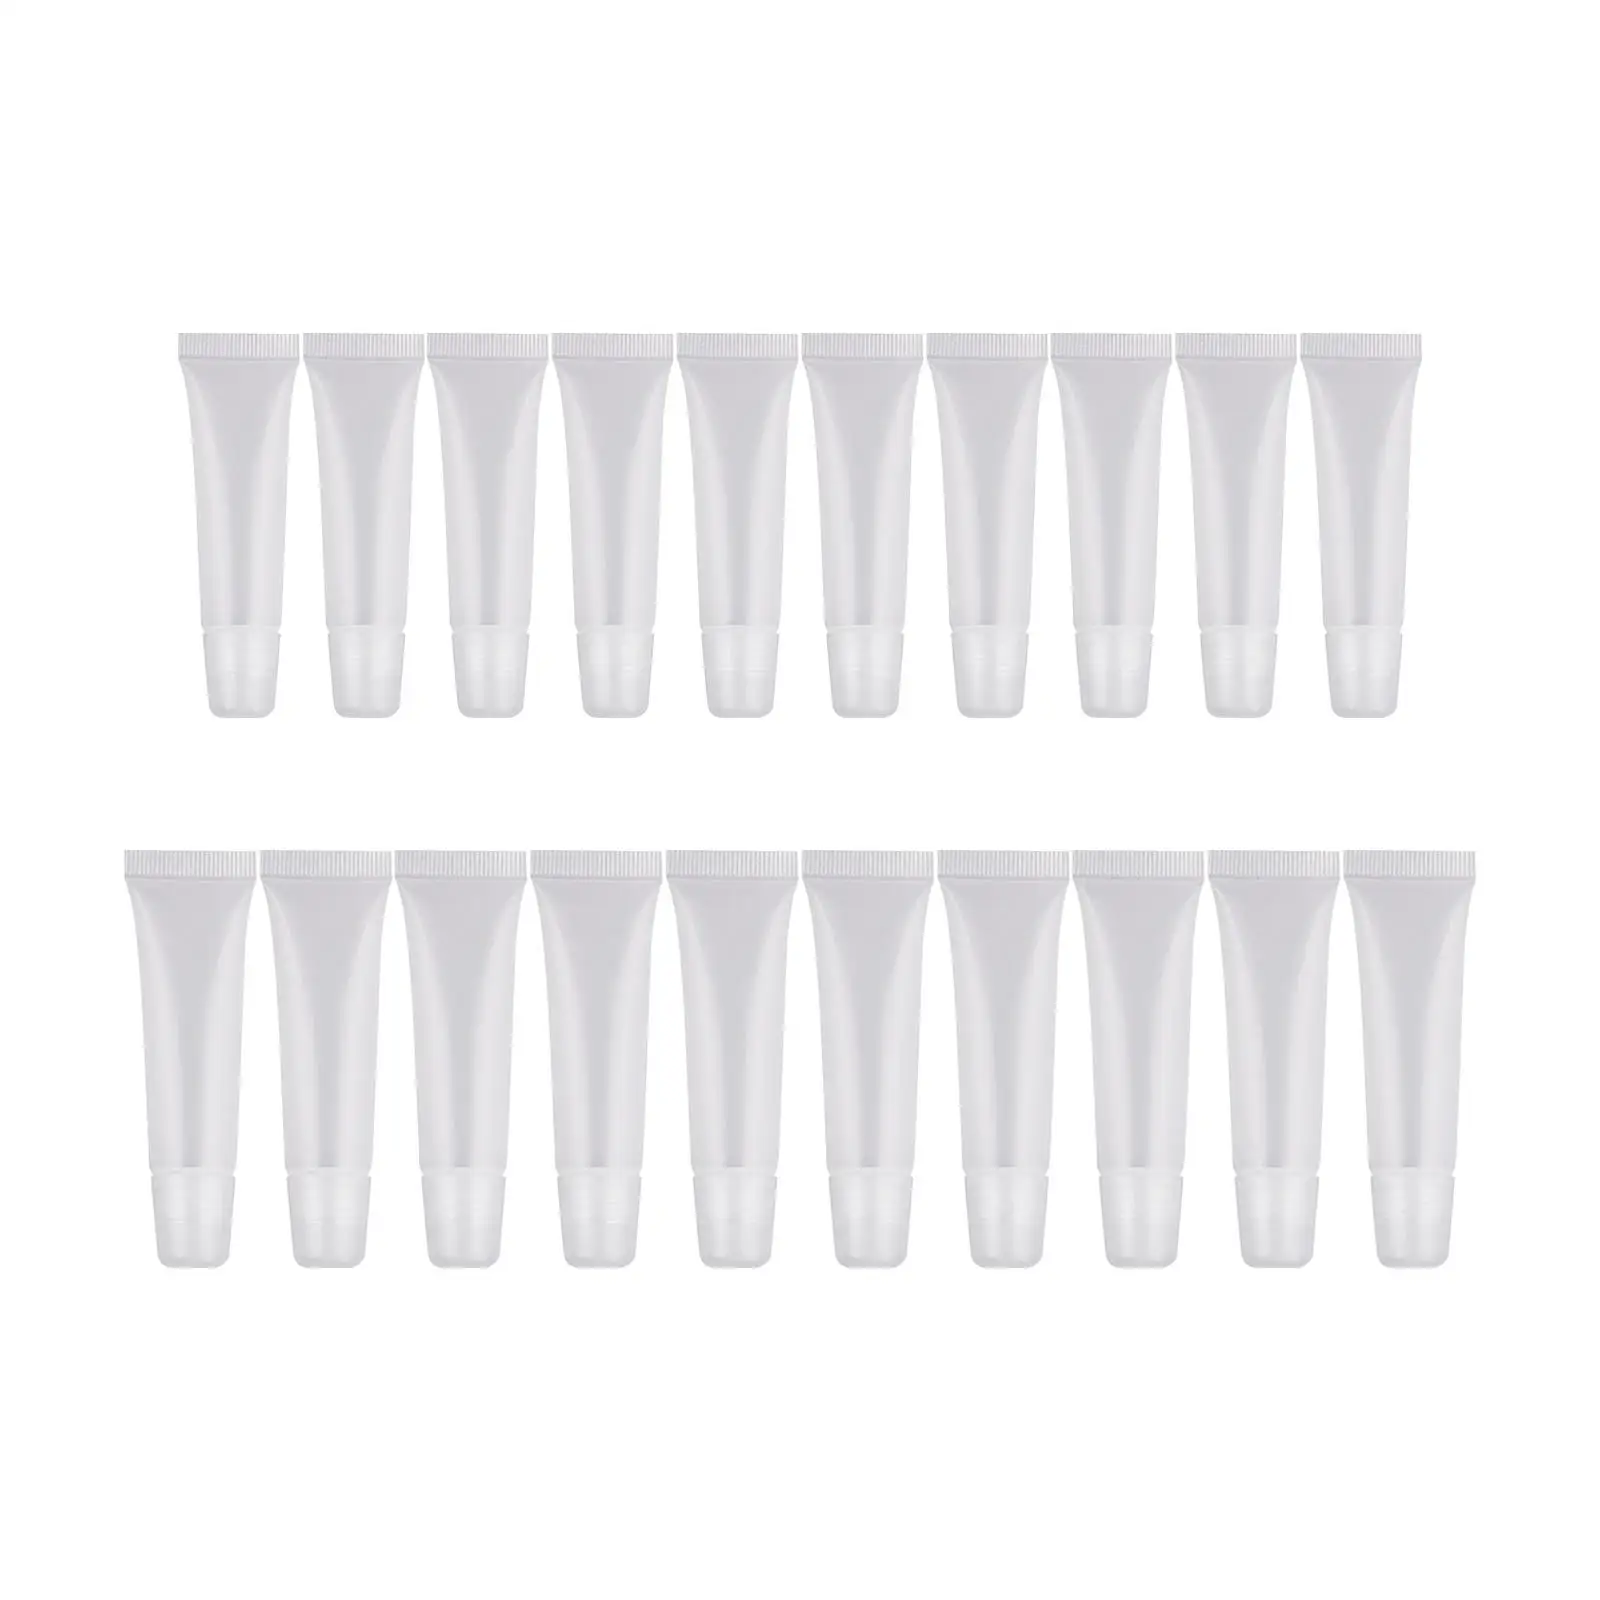 10x  Tubes  Tubes Empty Soft with Caps Portable Dispenser for DIY Lipgloss Base Travel Toiletries